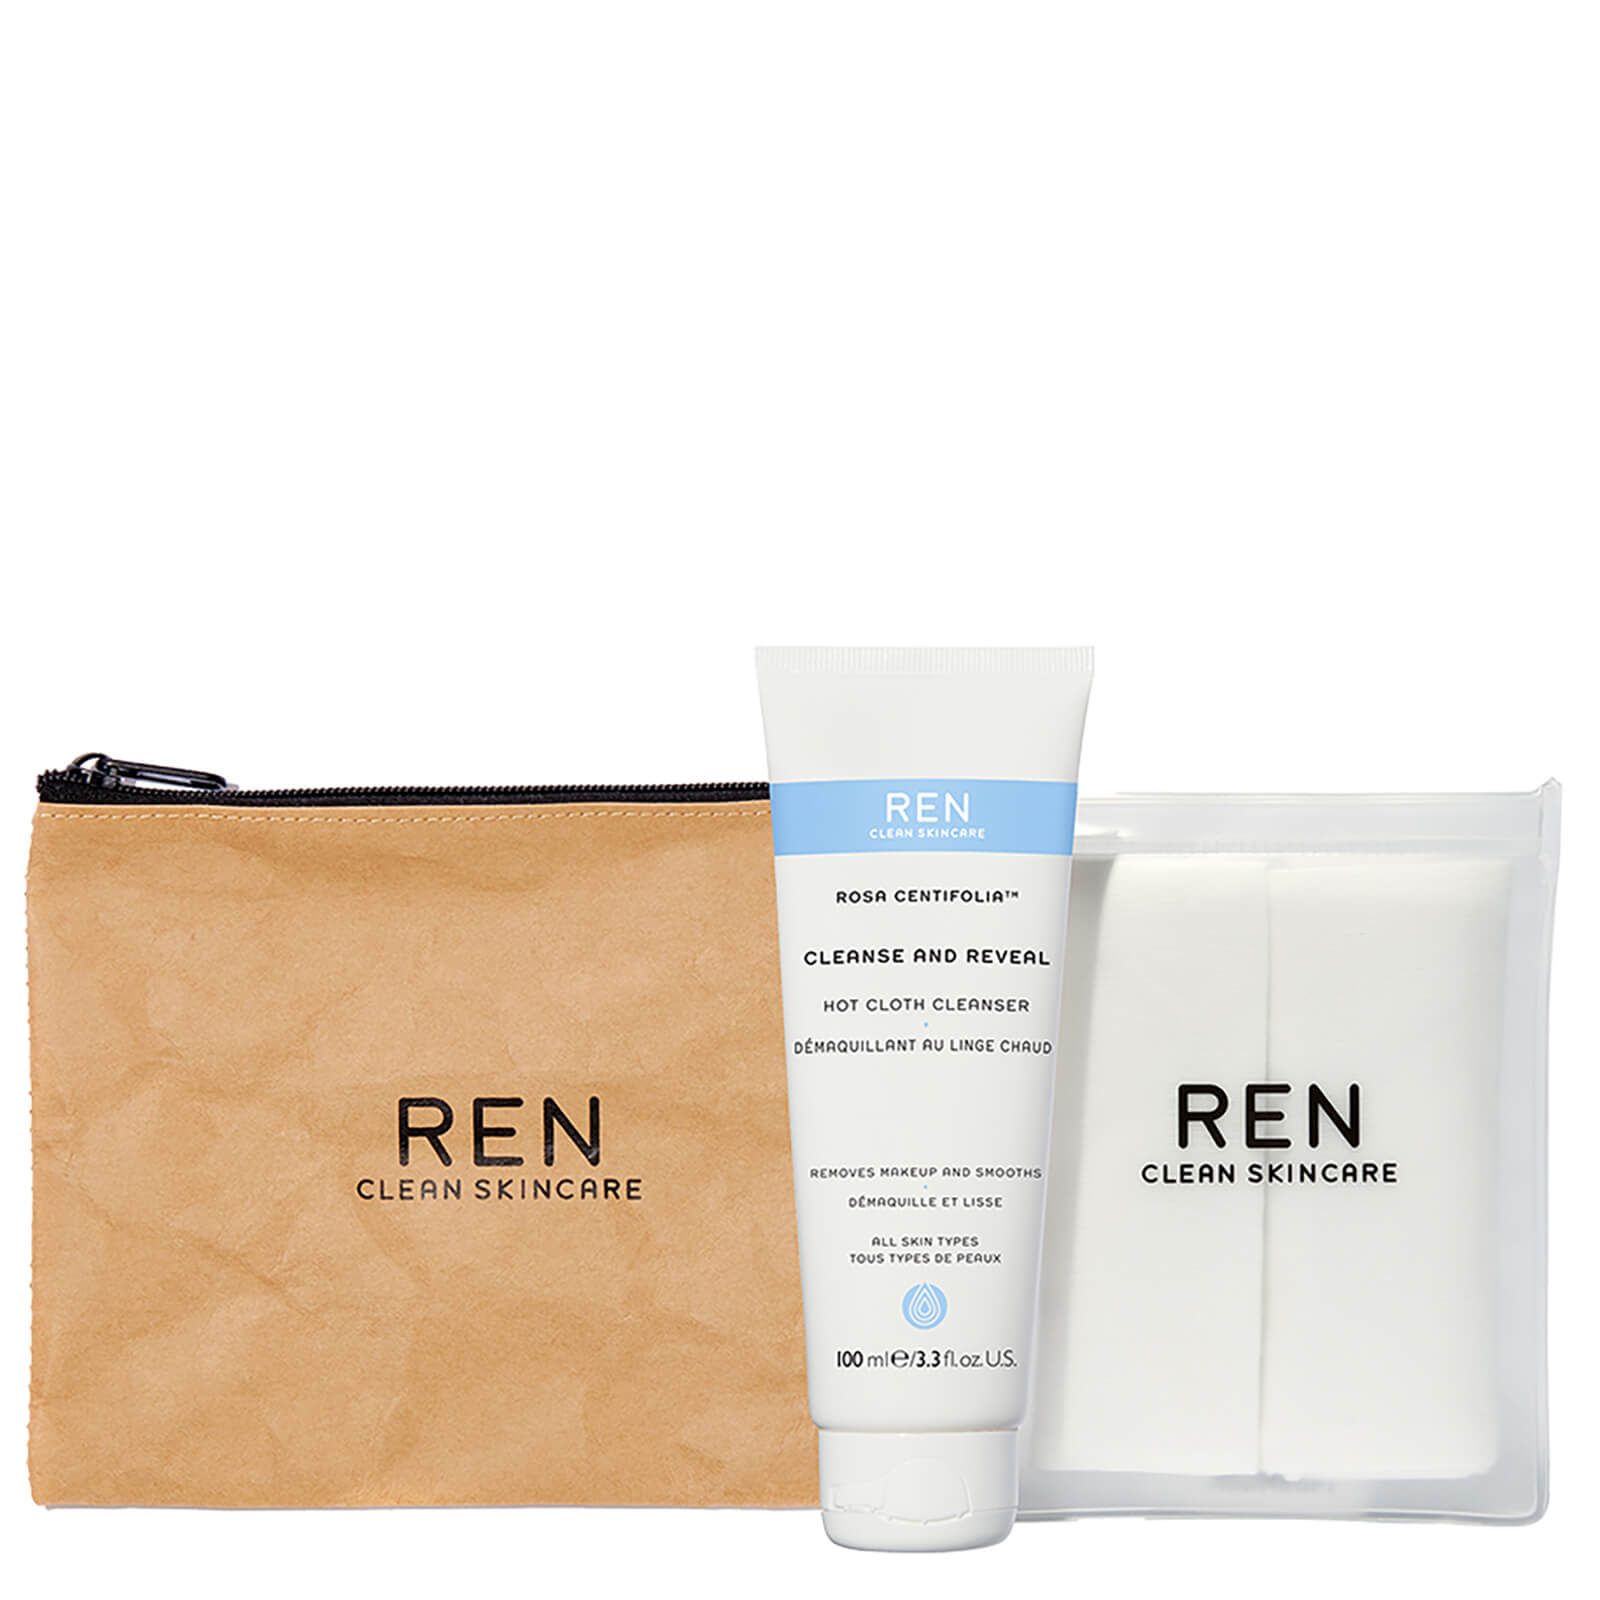 REN Cleanse and Reveal Hot Cloth Cleanser Kit